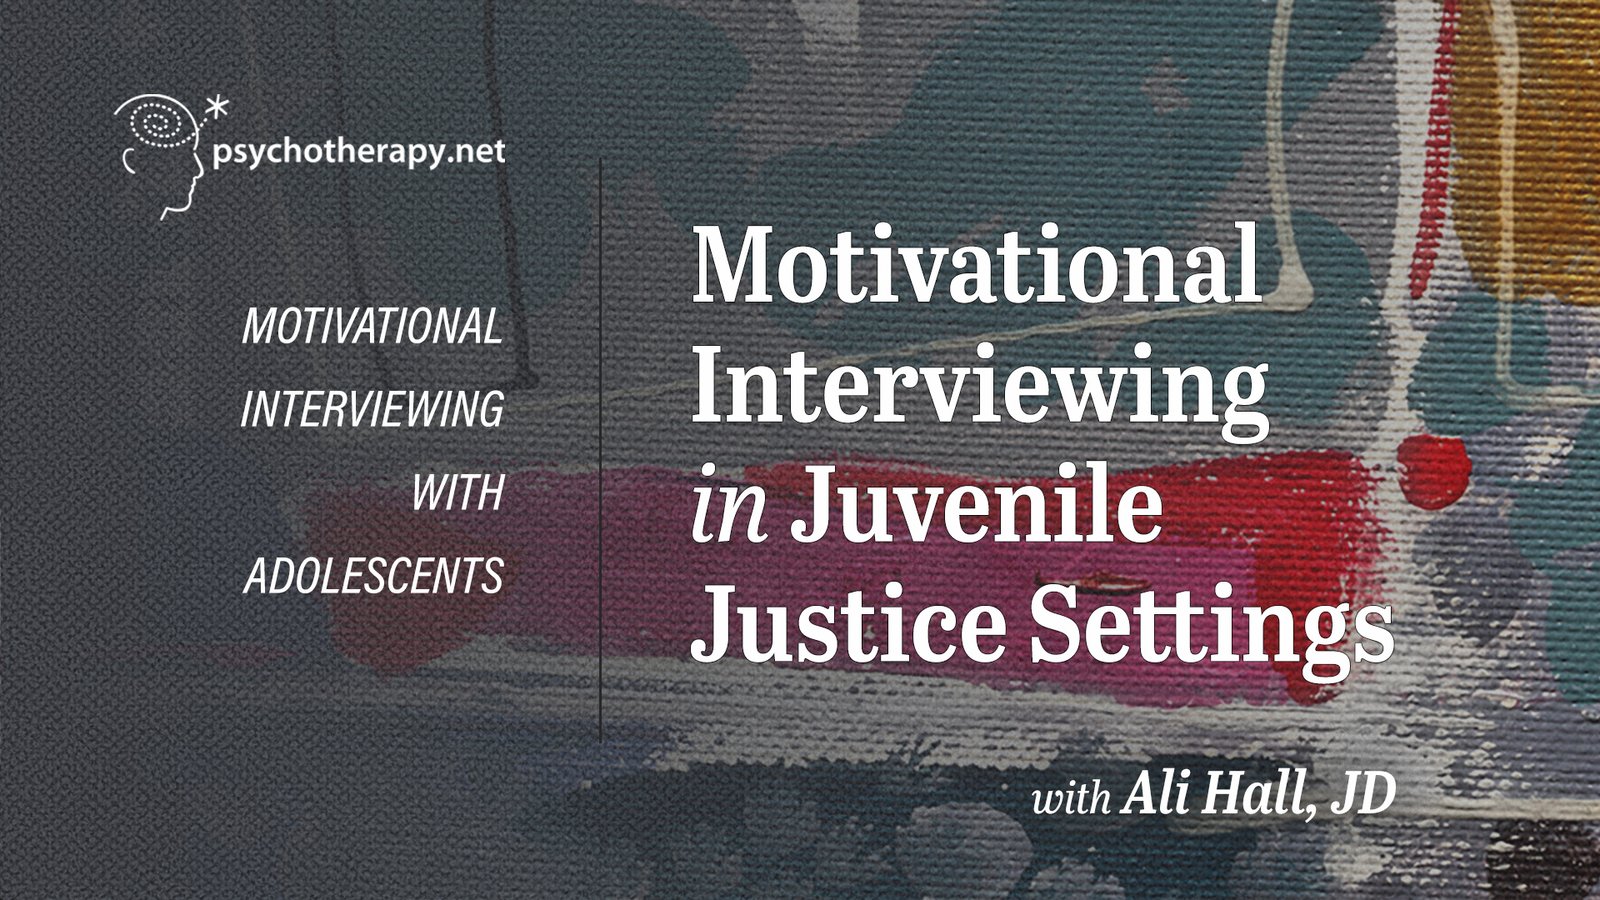 Motivational Interviewing in Juvenile Justice Settings